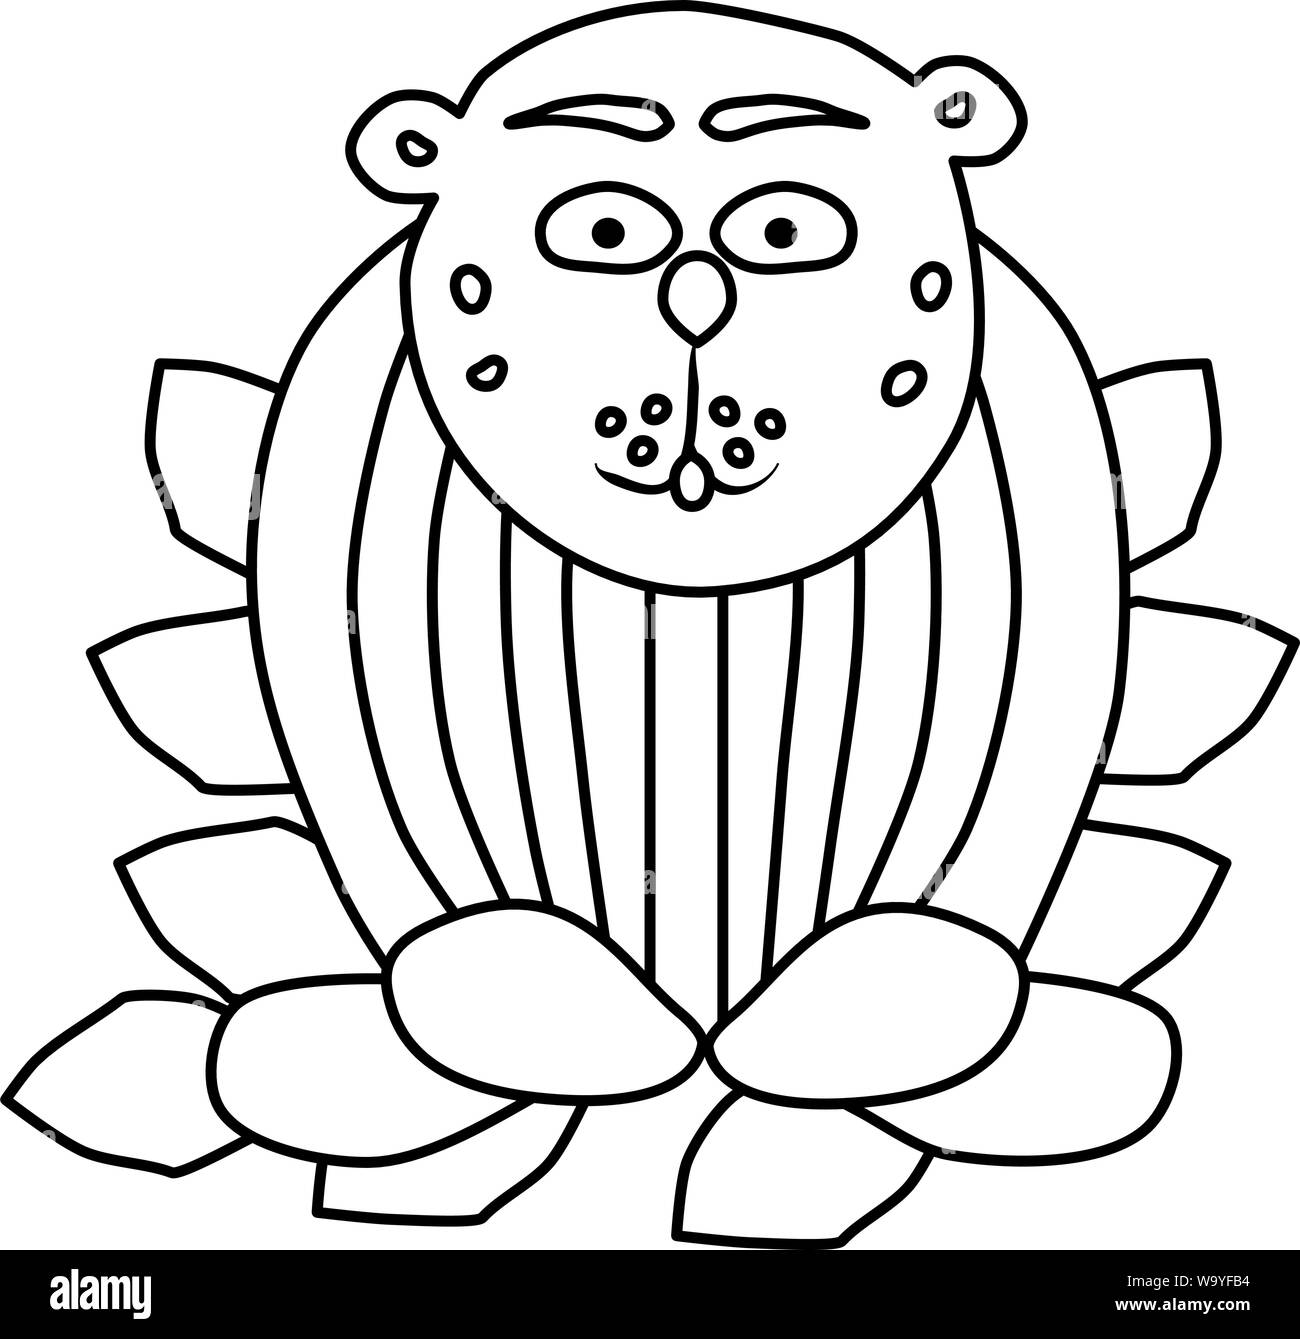 Coloring book for kids. The animal sits on leaves. Creative task for child. White illustration. Stock Vector